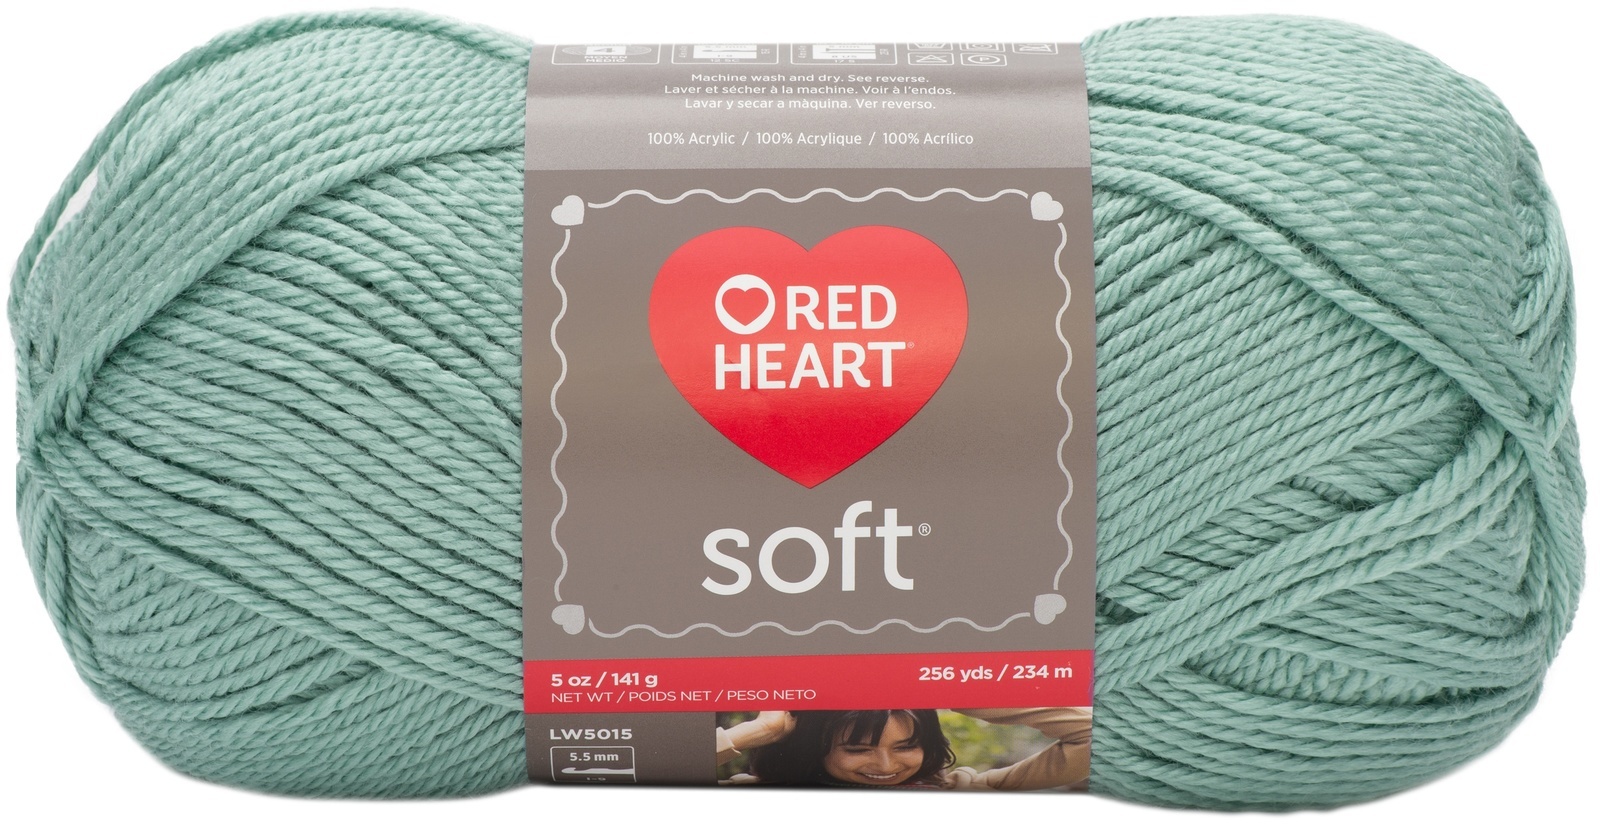 Primary image for Red Heart Soft Yarn-Seafoam E728-9520